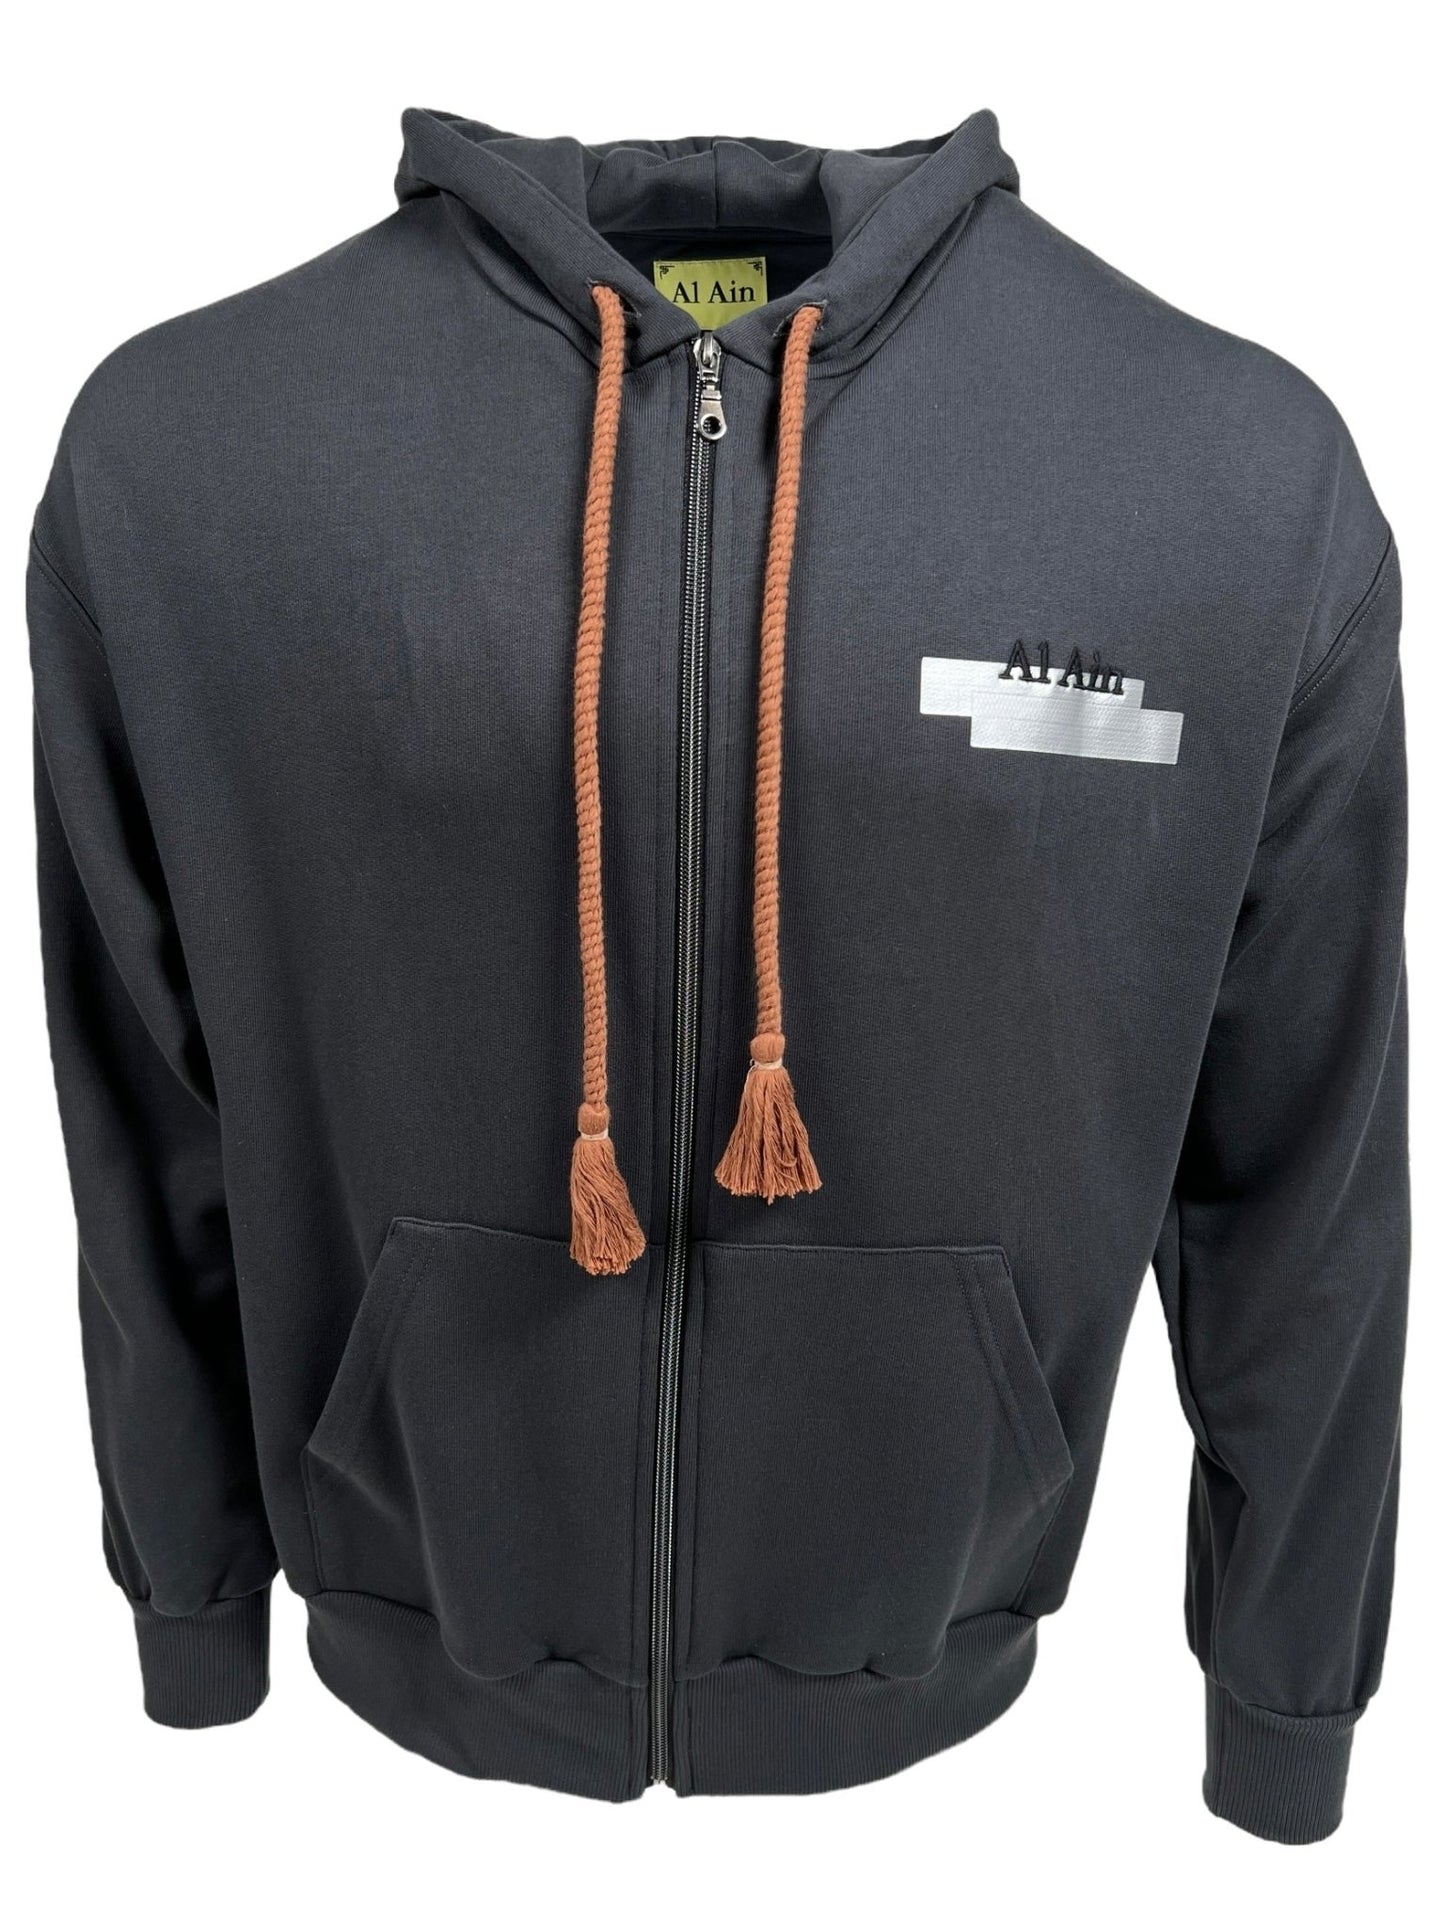 Dark gray hoodie with tassels on the zipper, featuring a white patch on the right chest labeled "AL AIN," crafted from 100% Cotton.